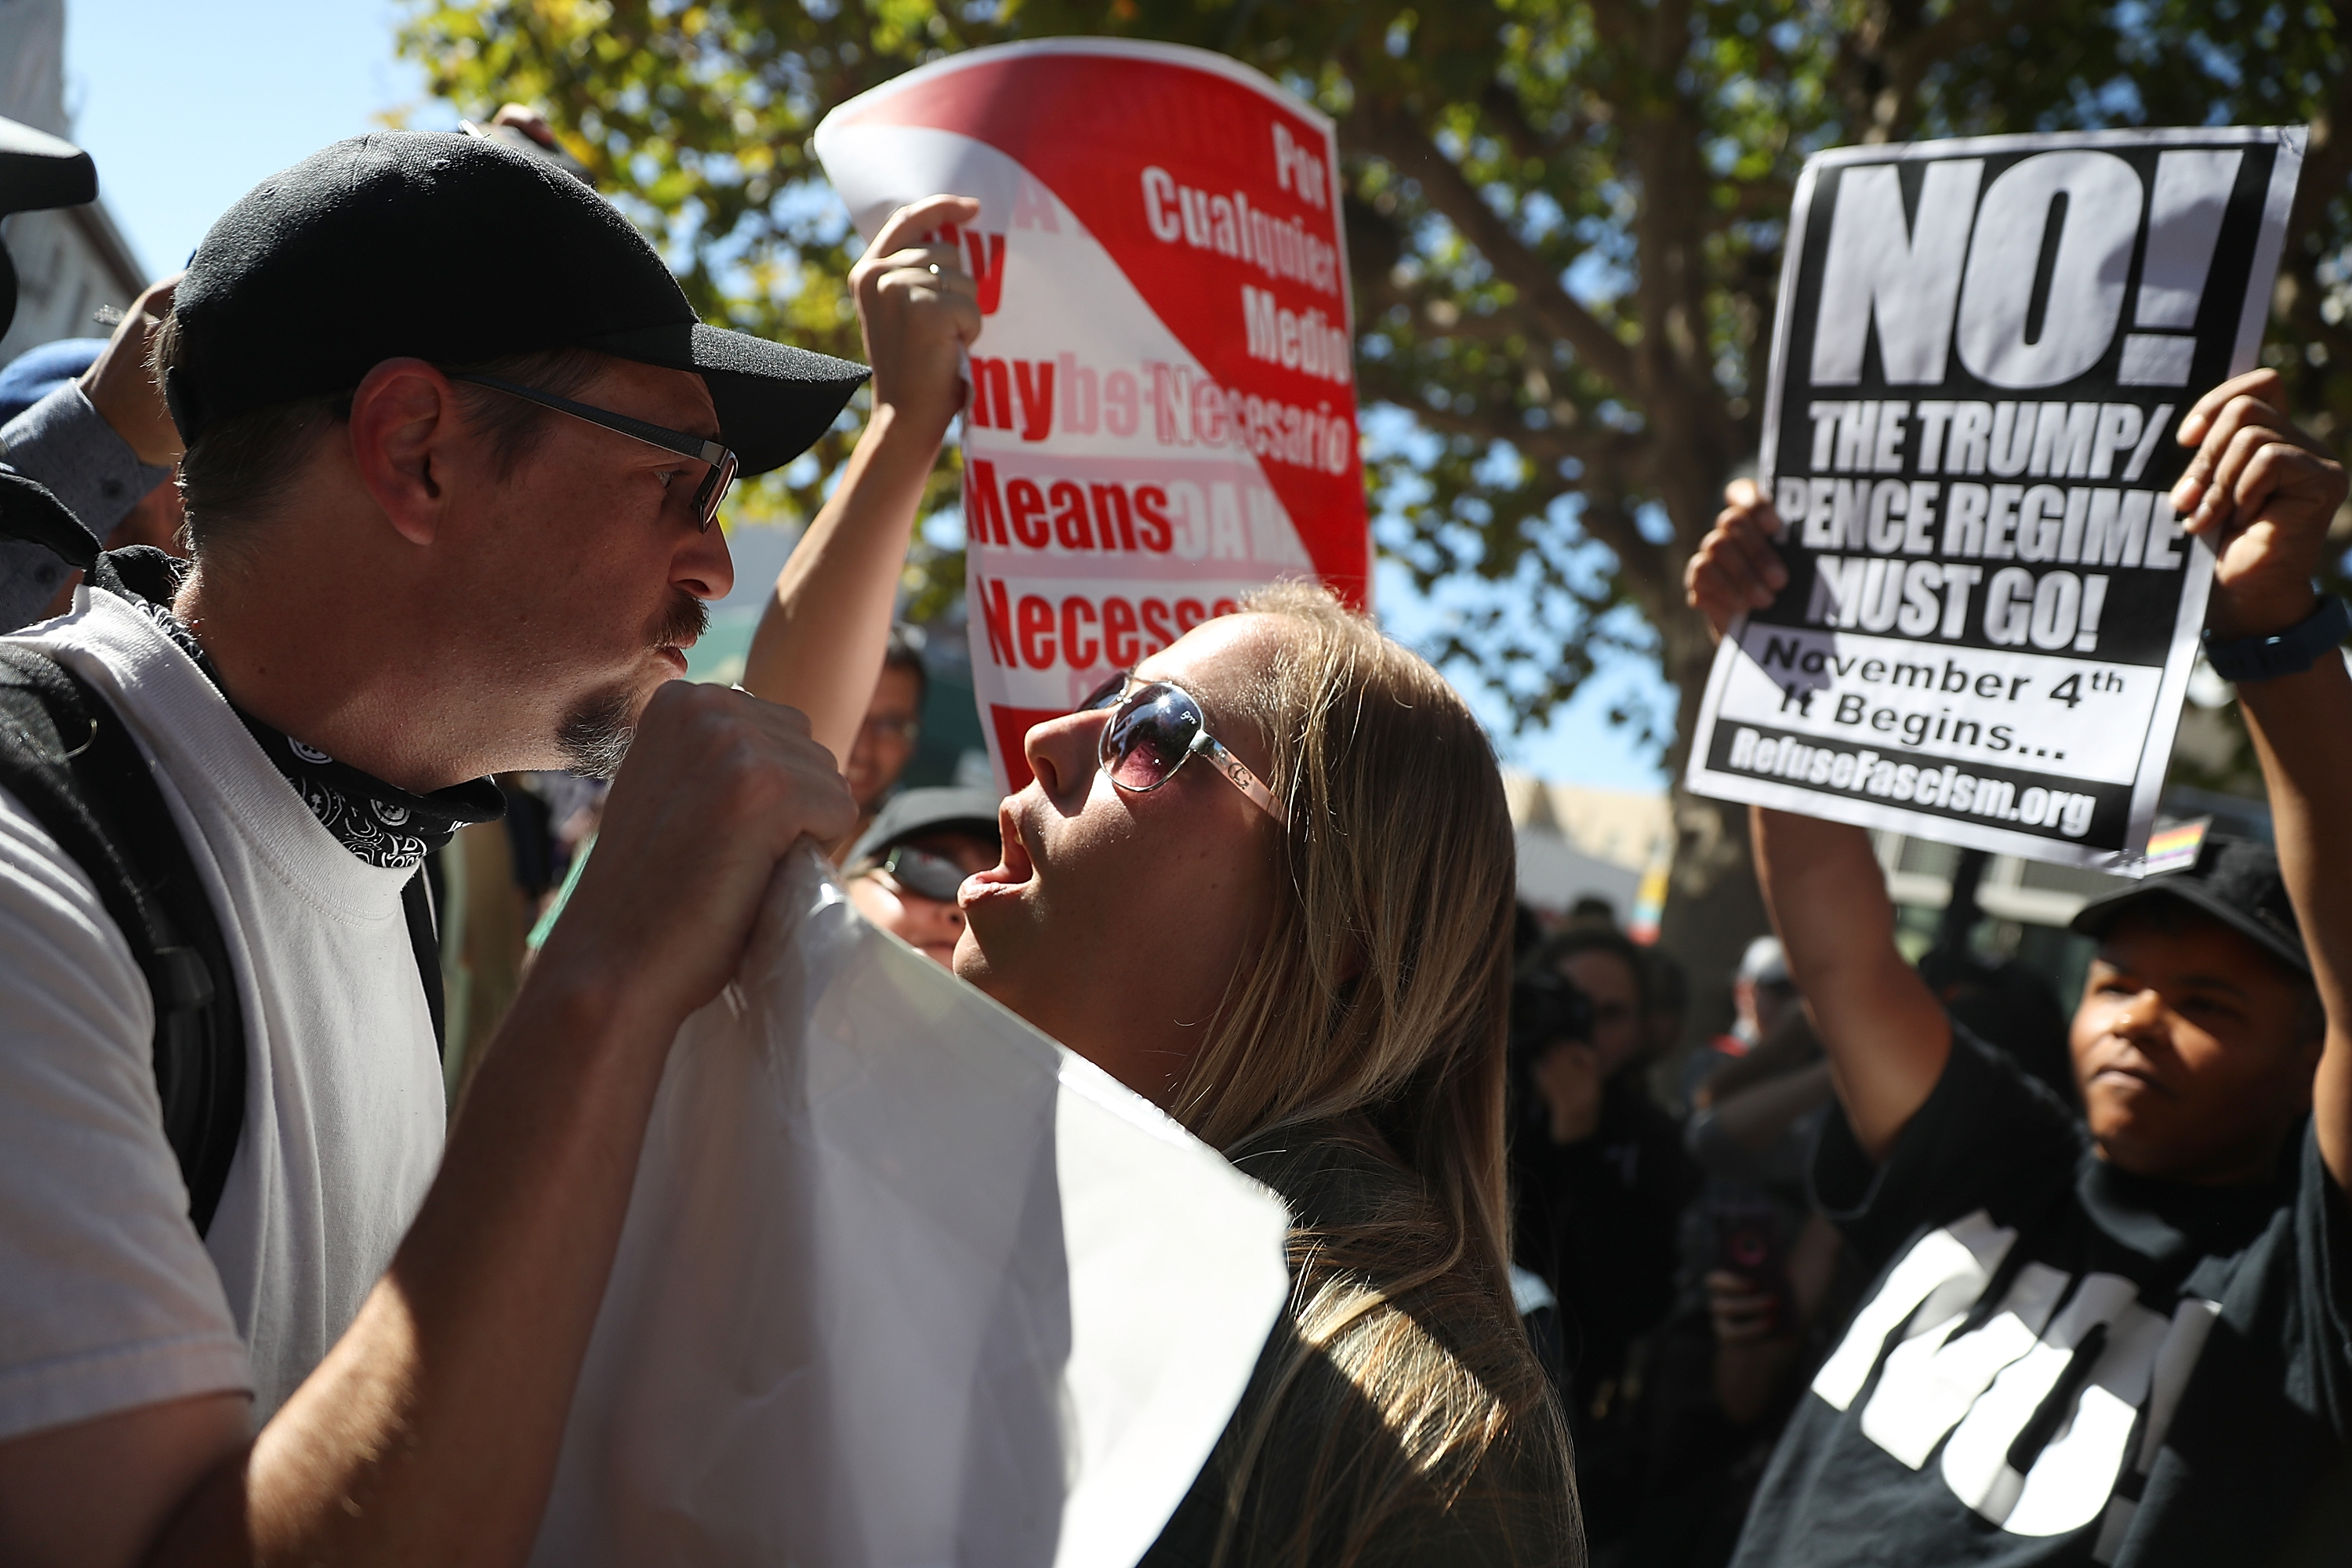 BERKELEY, CA - SEPTEMBER 24:  Protesters shout at each other during a free speech rally with right wing commentator Milo Yiannopoulos at U.C. Berkeley on September 24, 2017 in Berkeley, California. Hundreds of protesters came out to support and demonstrate against Milo Yiannopoulos as he held a free speech rally at U.C. Berkeley.  (Photo by Justin Sullivan/Getty Images) (Justin Sullivan&mdash;Getty Images)